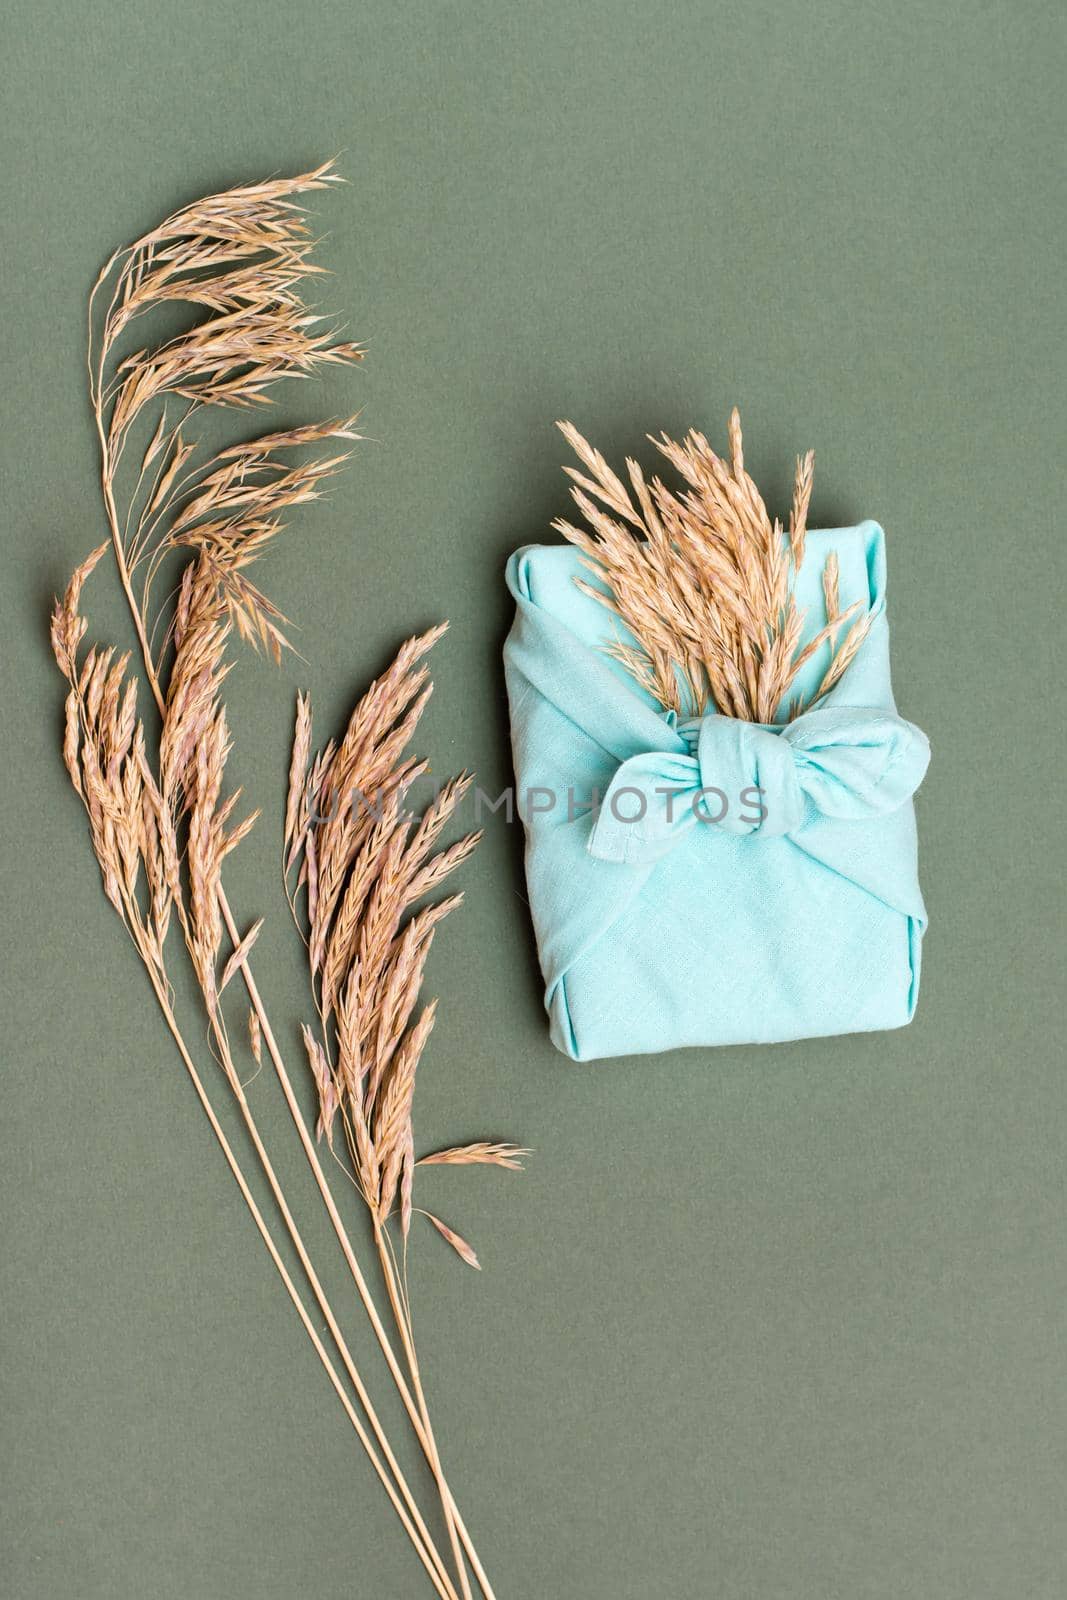 Eco friendly furoshiki gift with ears of dry grass on green background. Vertical view